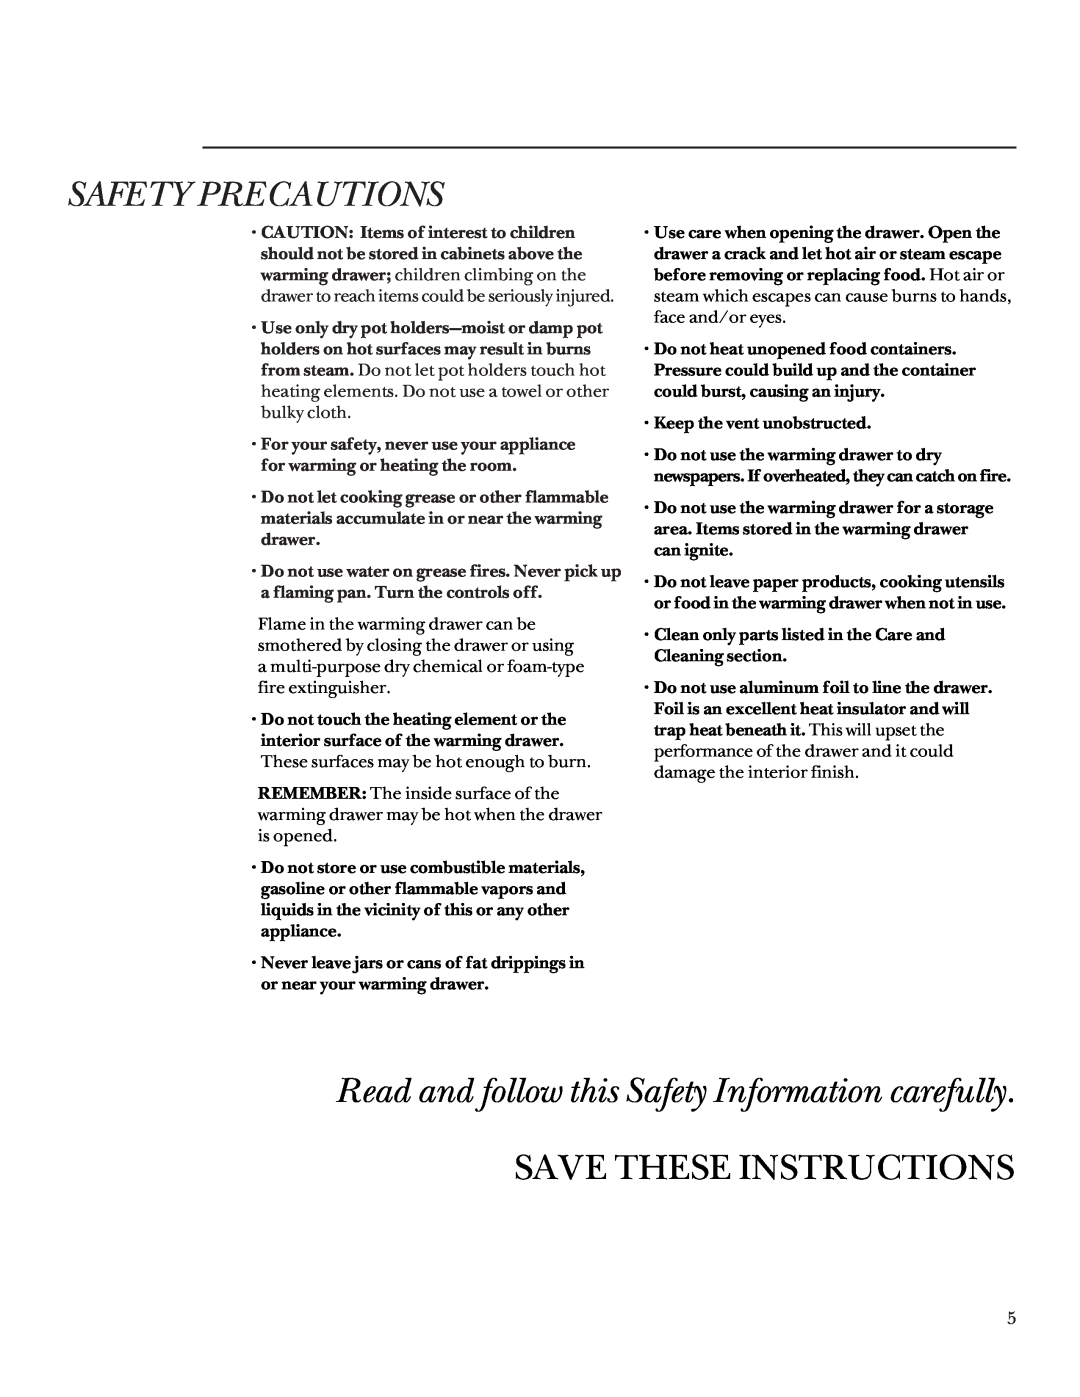 GE ZDT910, ZDK910 manual Read and follow this Safety Information carefully, Save These Instructions, Safety Precautions 